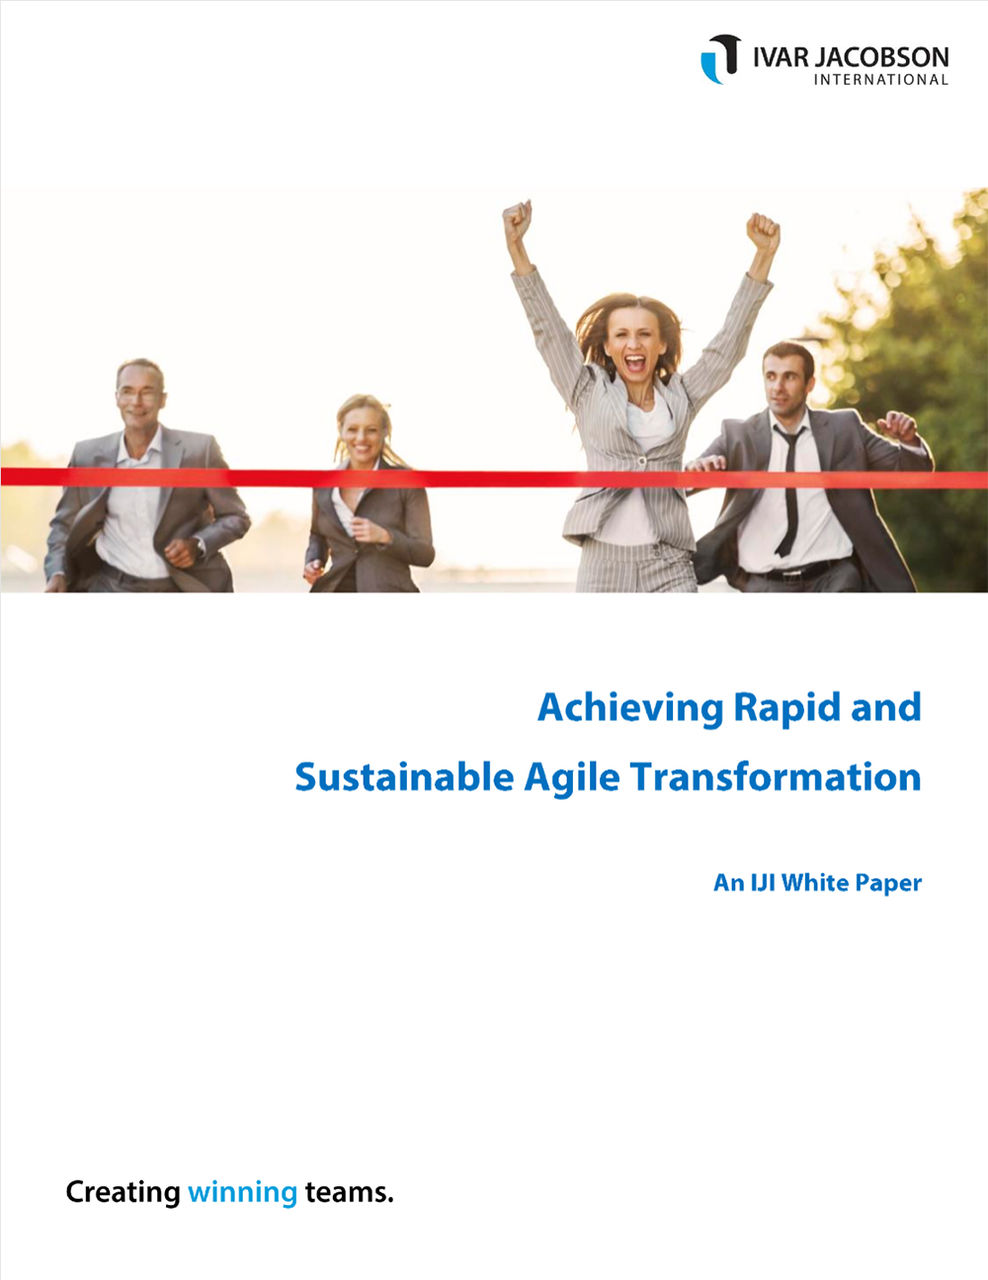 An image of the front cover of our White Paper entitled "Achieving Rapid and Sustainable Agile Transformation"